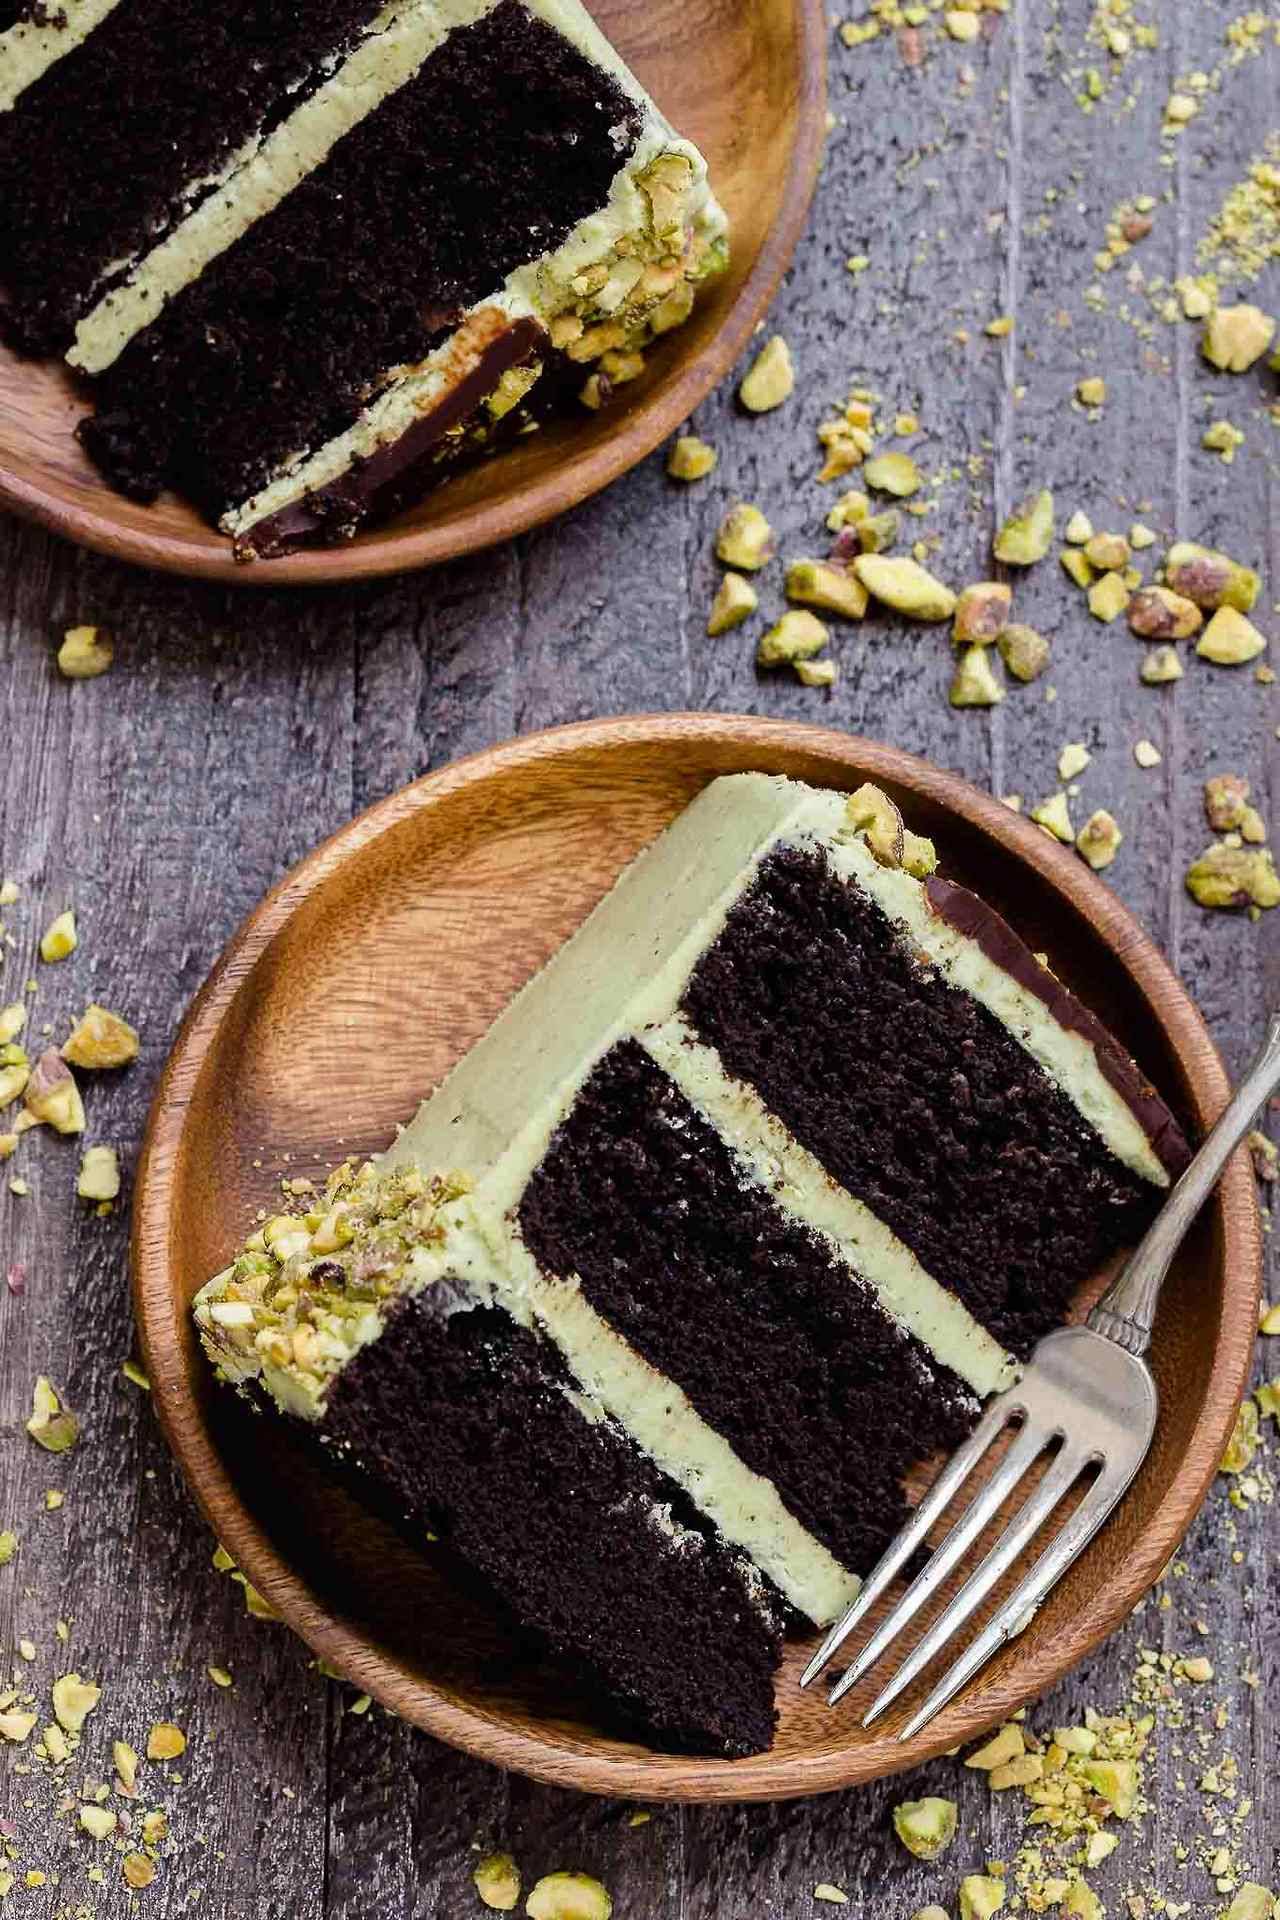 sweetoothgirl:  Layered Chocolate Pistachio Cake  This reminds me of the dessert